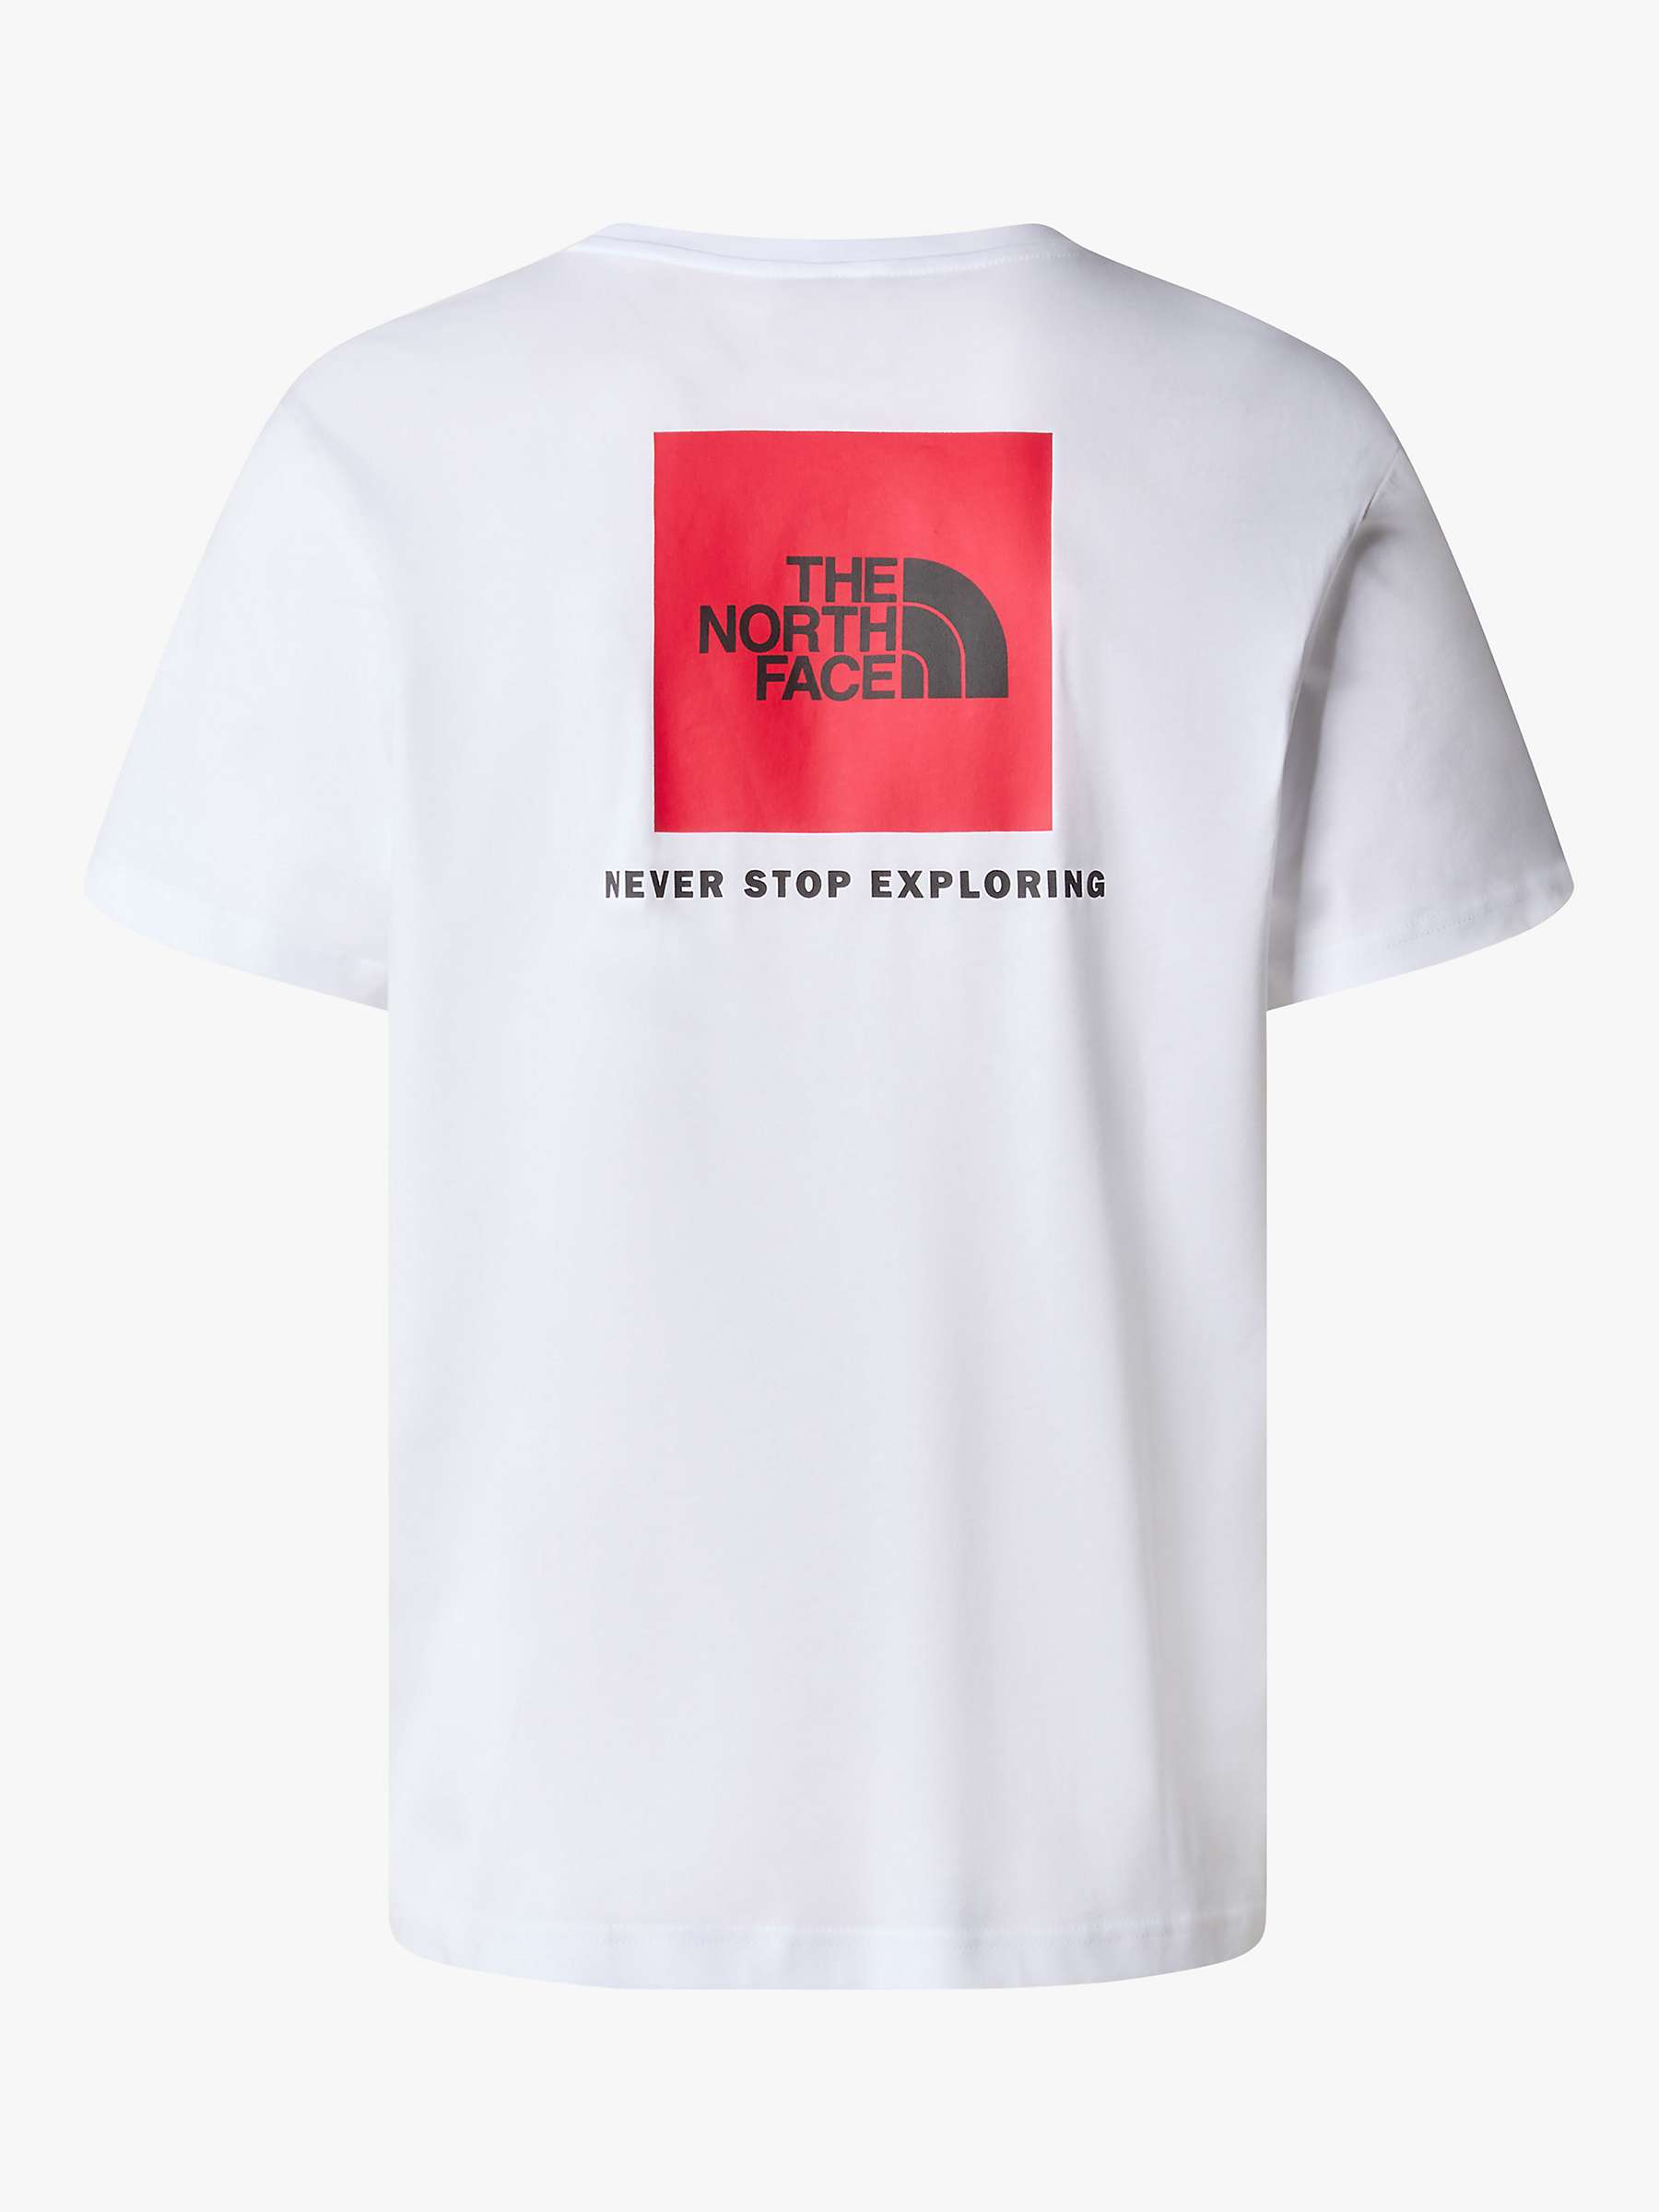 Buy The North Face Redbox Logo Short Sleeve T-Shirt, White Online at johnlewis.com